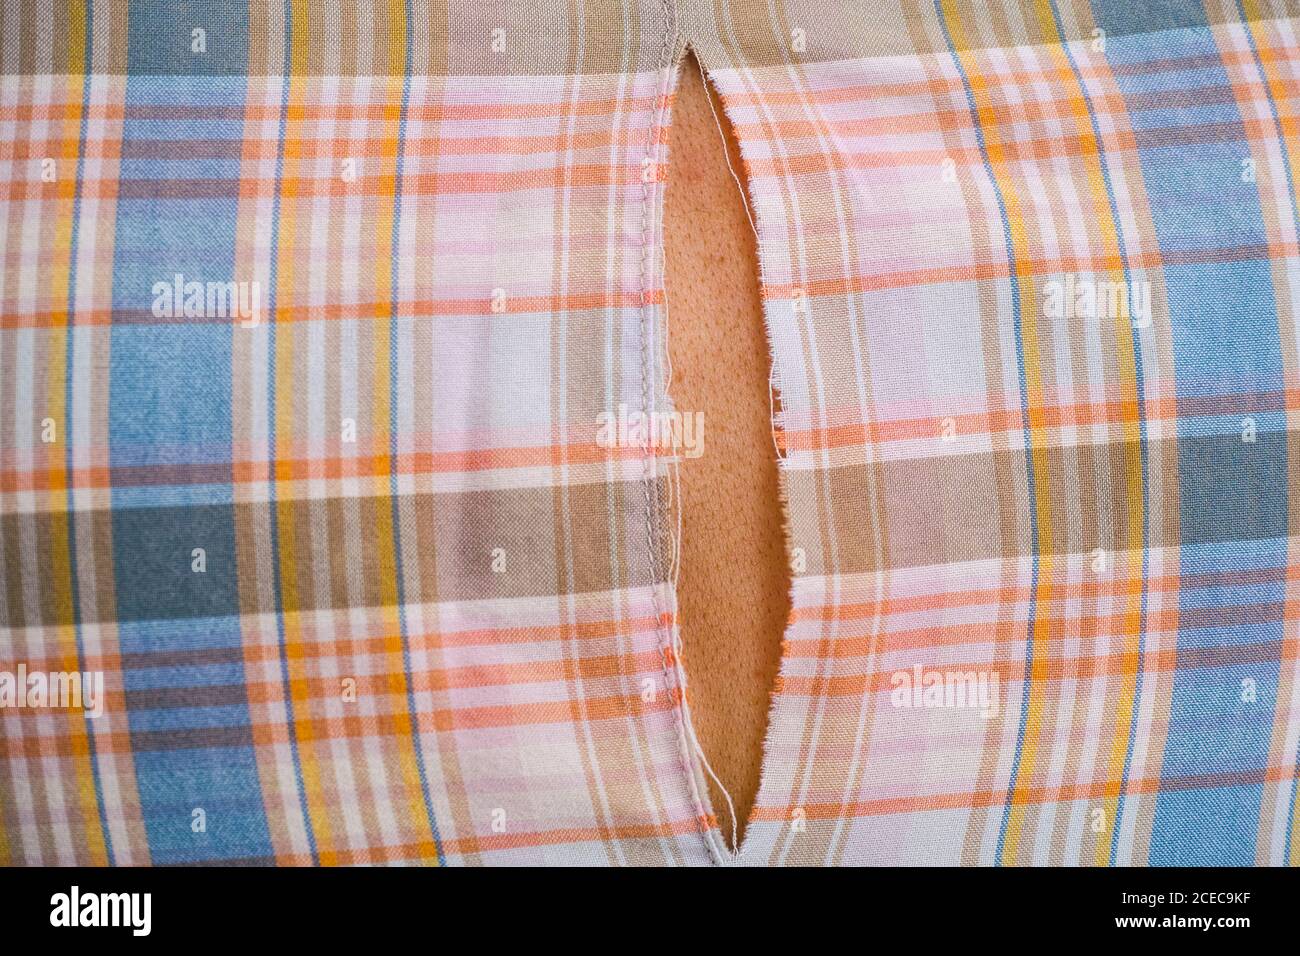 Torn Stretch Jersey Fabric Distressed Holes Stock Photo 508661167